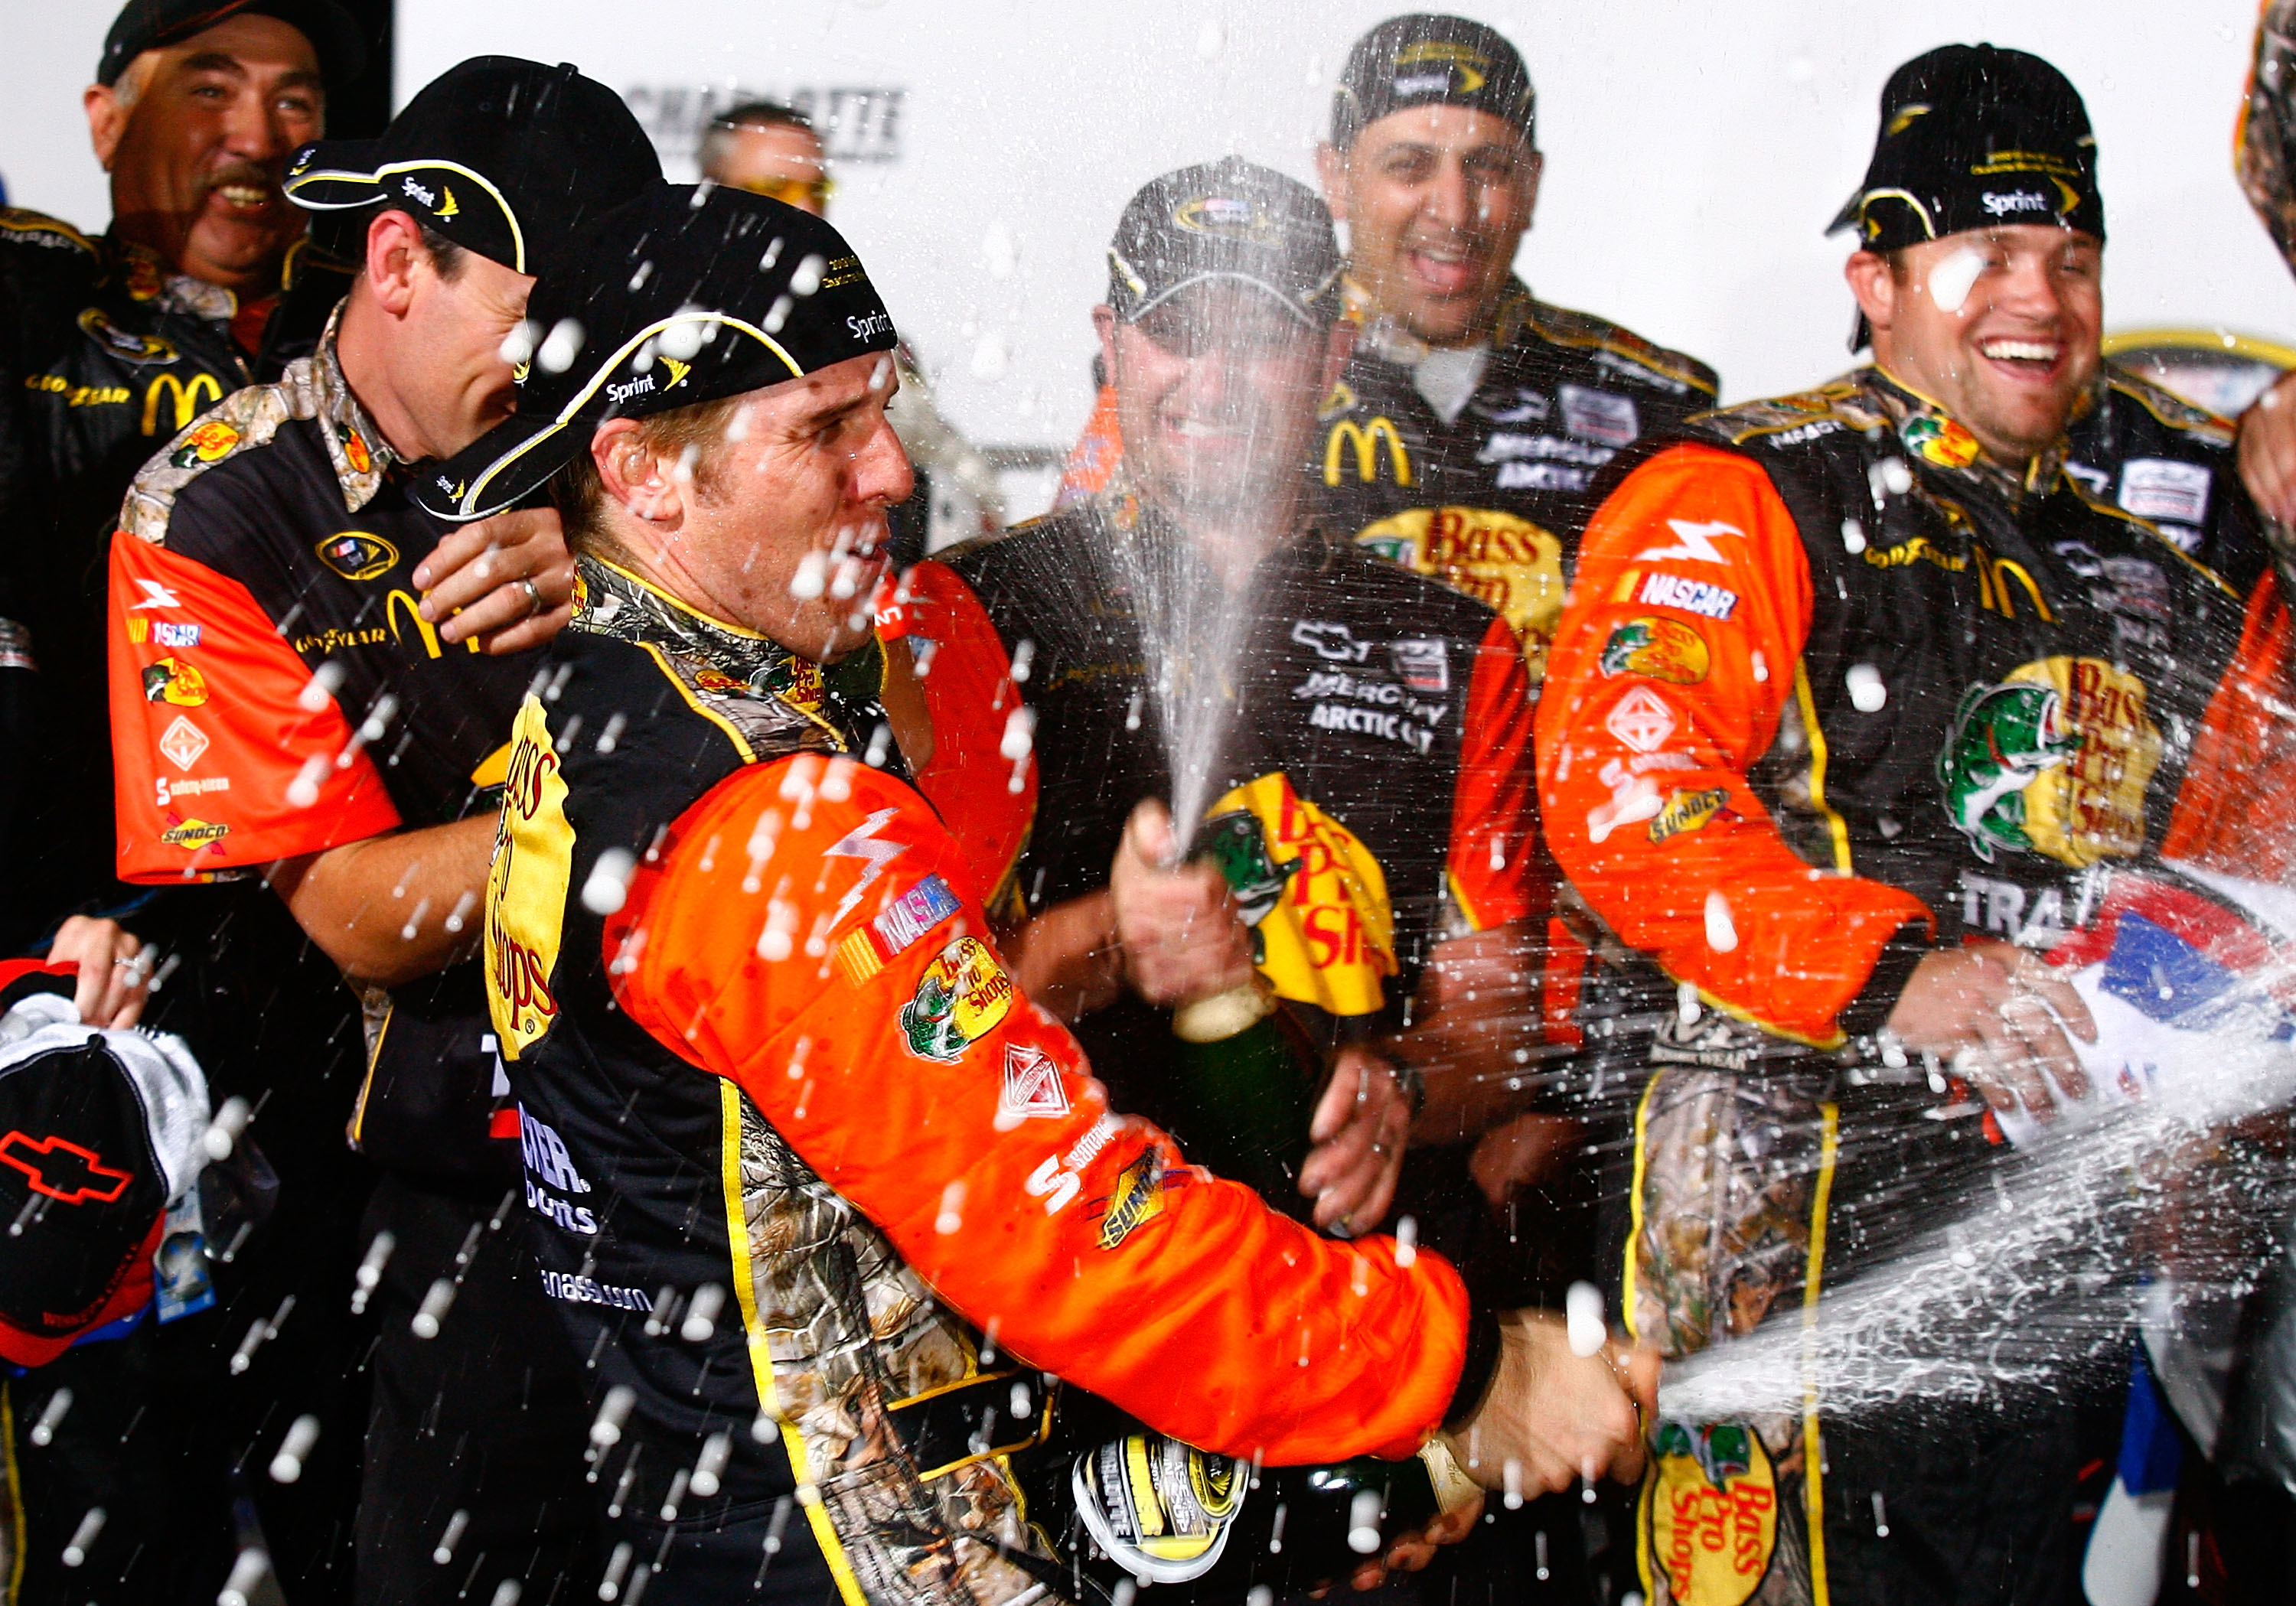 CONCORD, NC - OCTOBER 16:  Jamie McMurray, driver of the #1 Bass Pro Shops/Tracker Boats Chevrolet, celebrates in Victory Lane after winning the NASCAR Sprint Cup Series Bank of America 500 at Charlotte Motor Speedway on October 16, 2010 in Concord, North